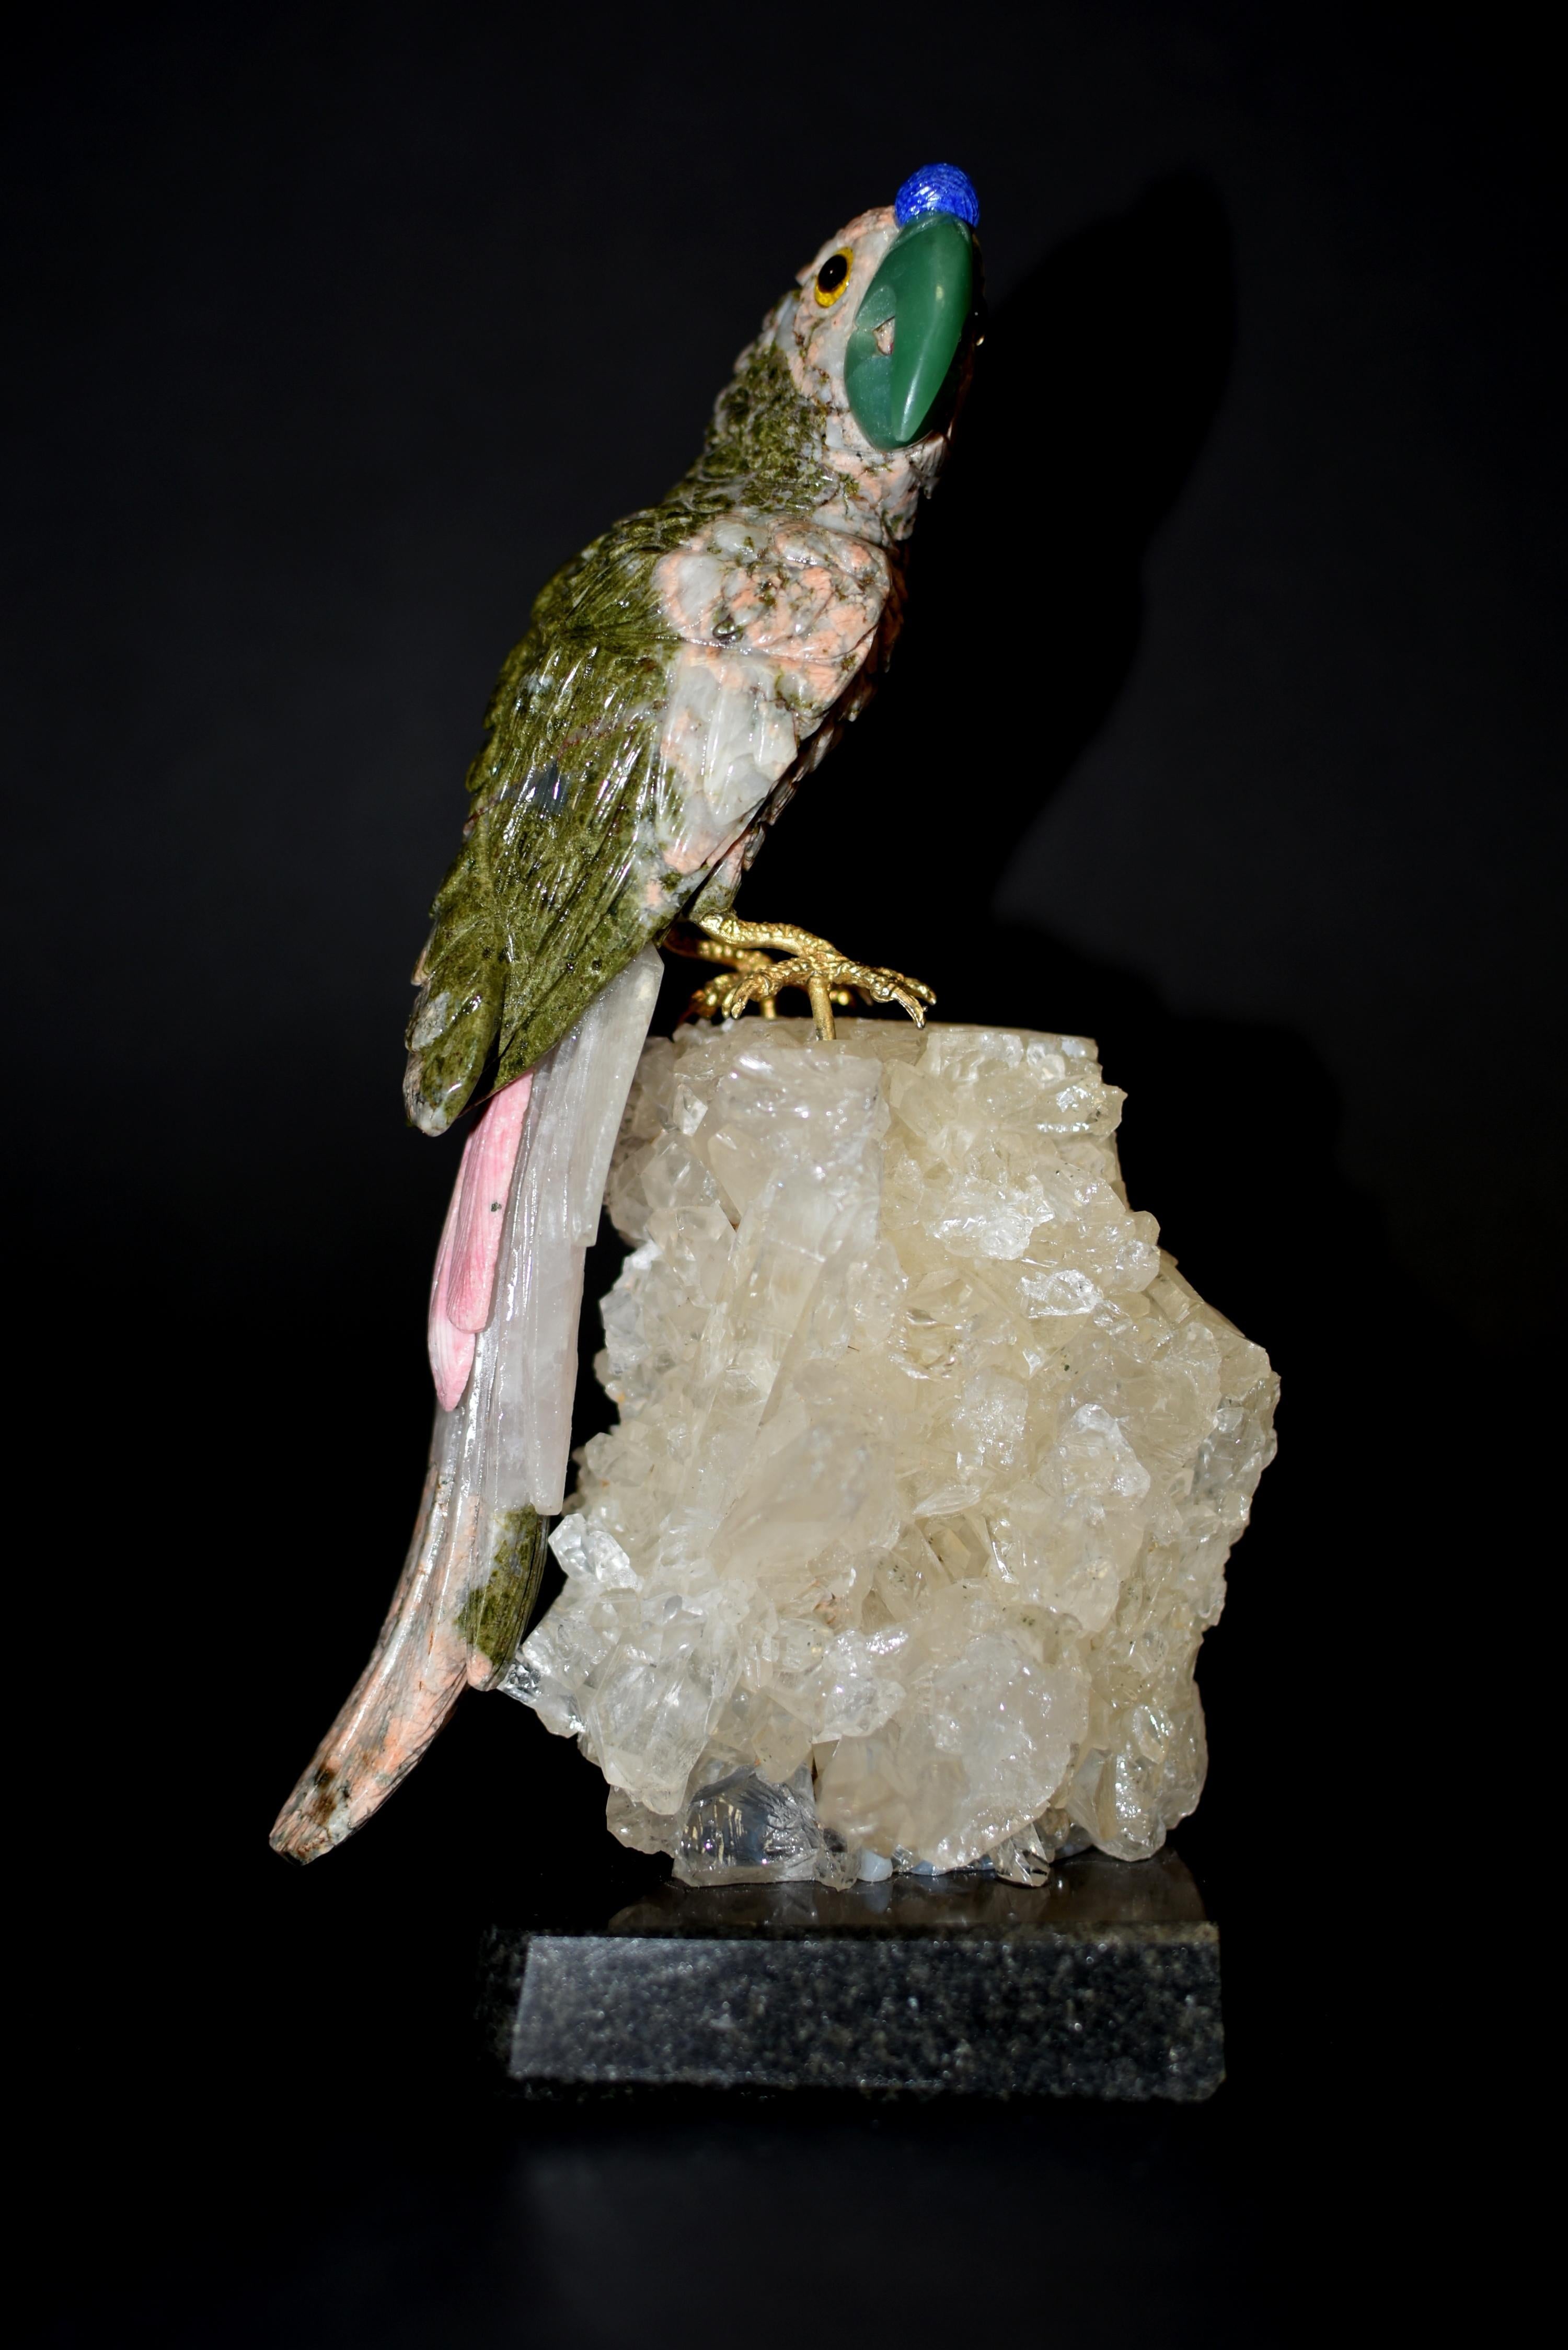 A finely carved gemstone parrot sculpture. Naturalistically modeled perched on rock crystal clusters, with beautiful plumage made of green gemstone unakite and pink redonite, an aventurine beak and blue sodalite crowning the forehead. The parrot